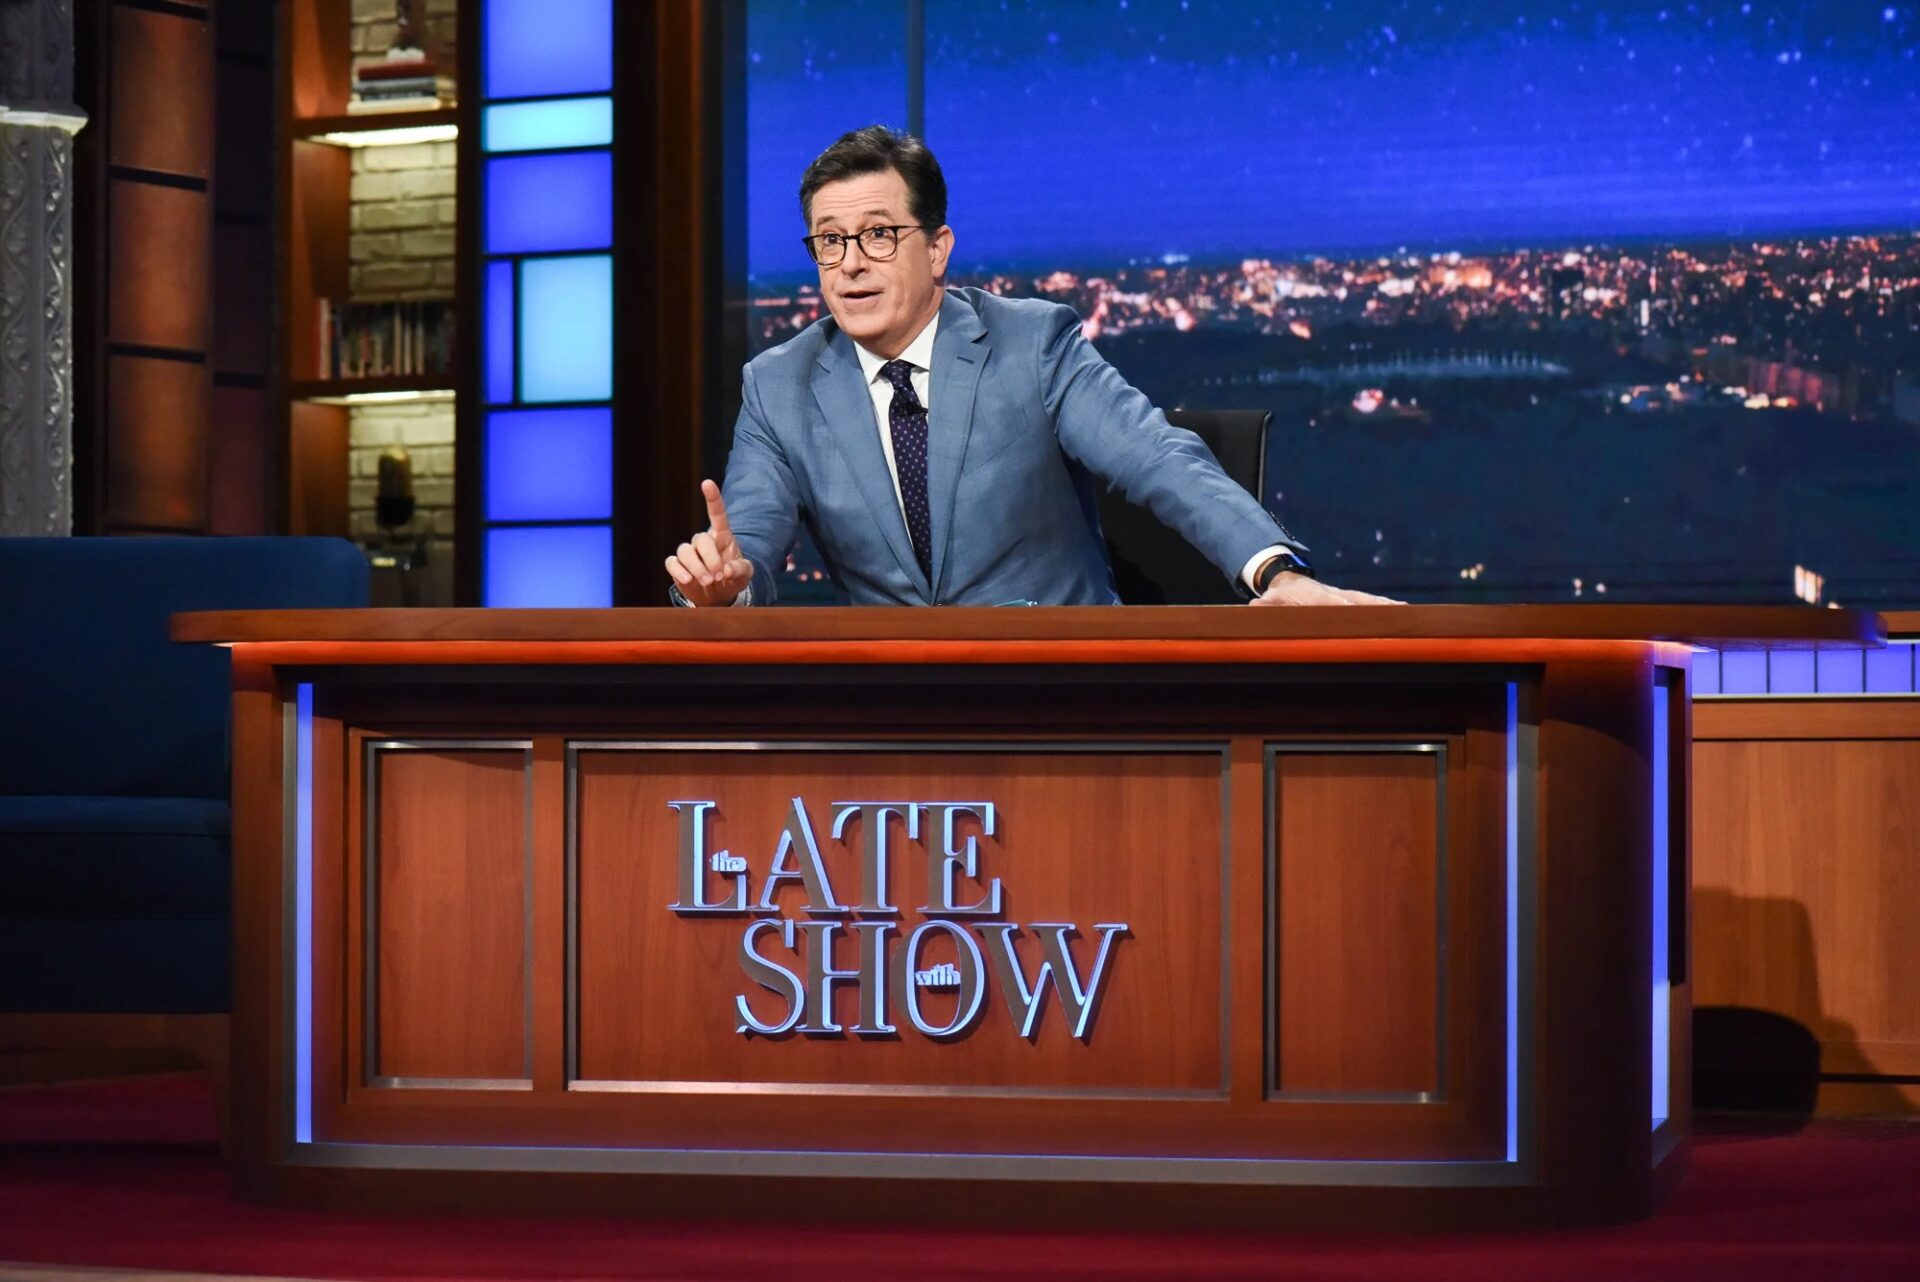 Is Stephen Colbert on Vacation this Week? - Why is Stephen Colbert's Late Show Not Airing This